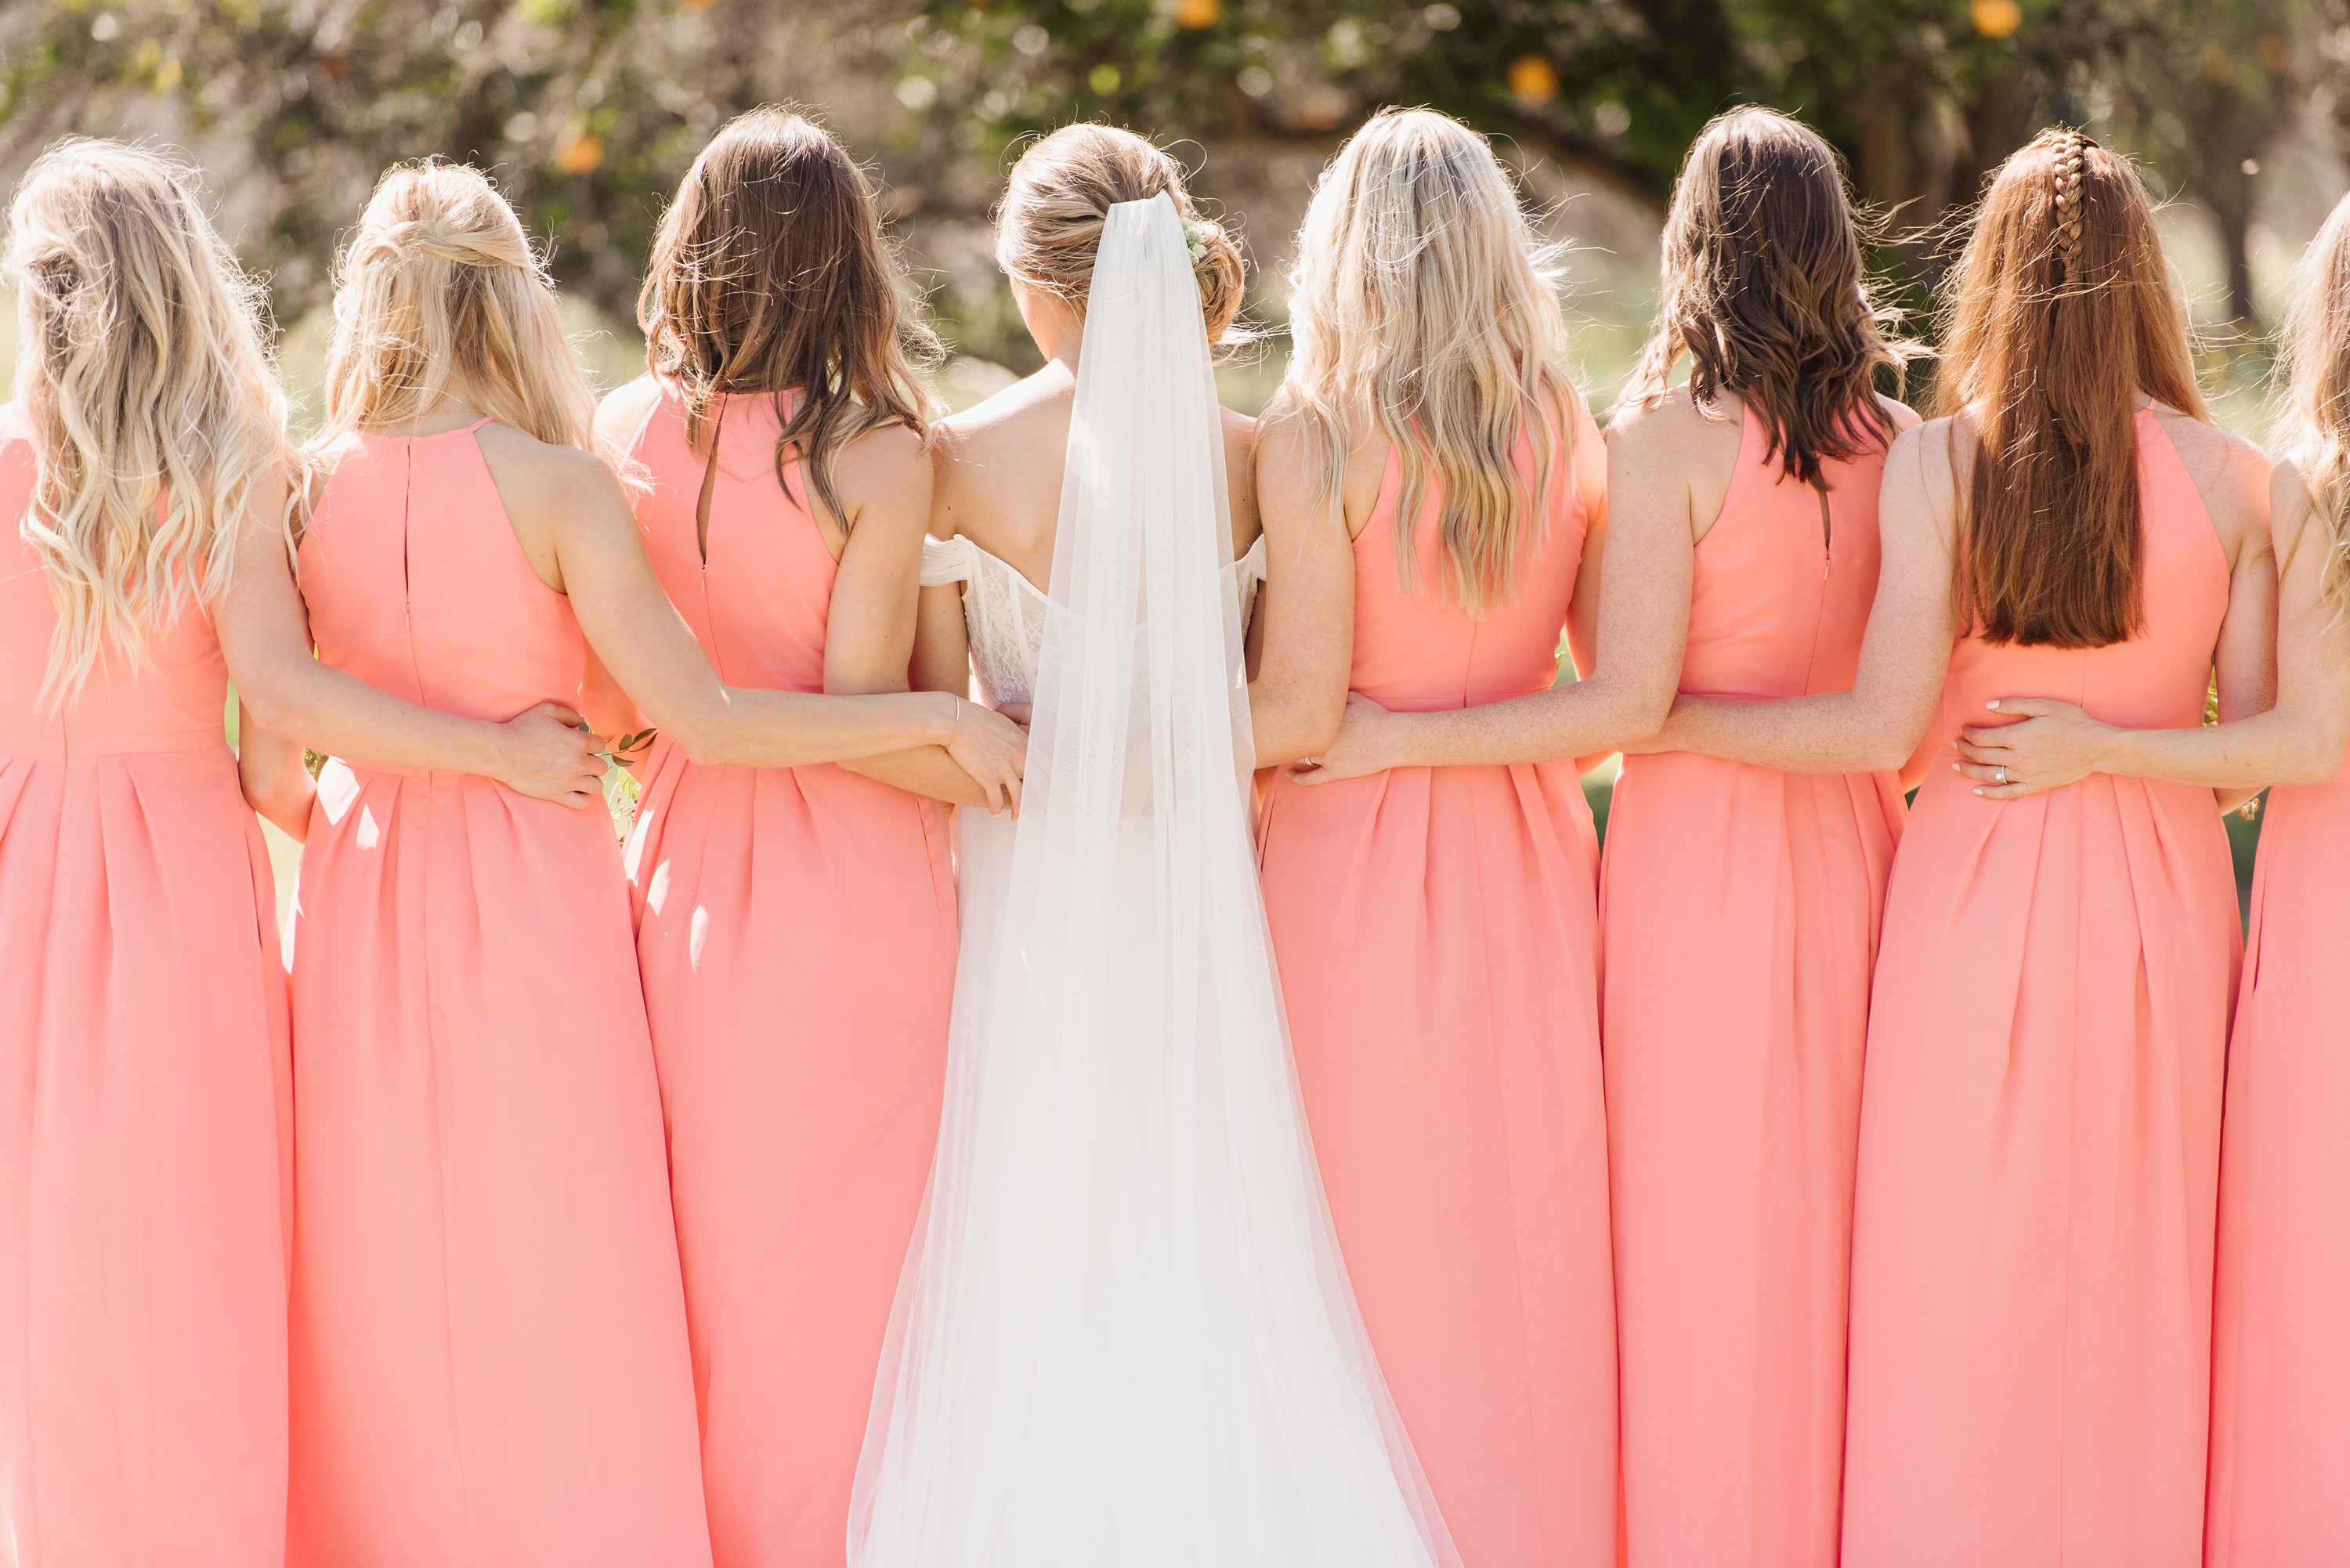 Affordable orange county wedding photographer,floral brides maid robes